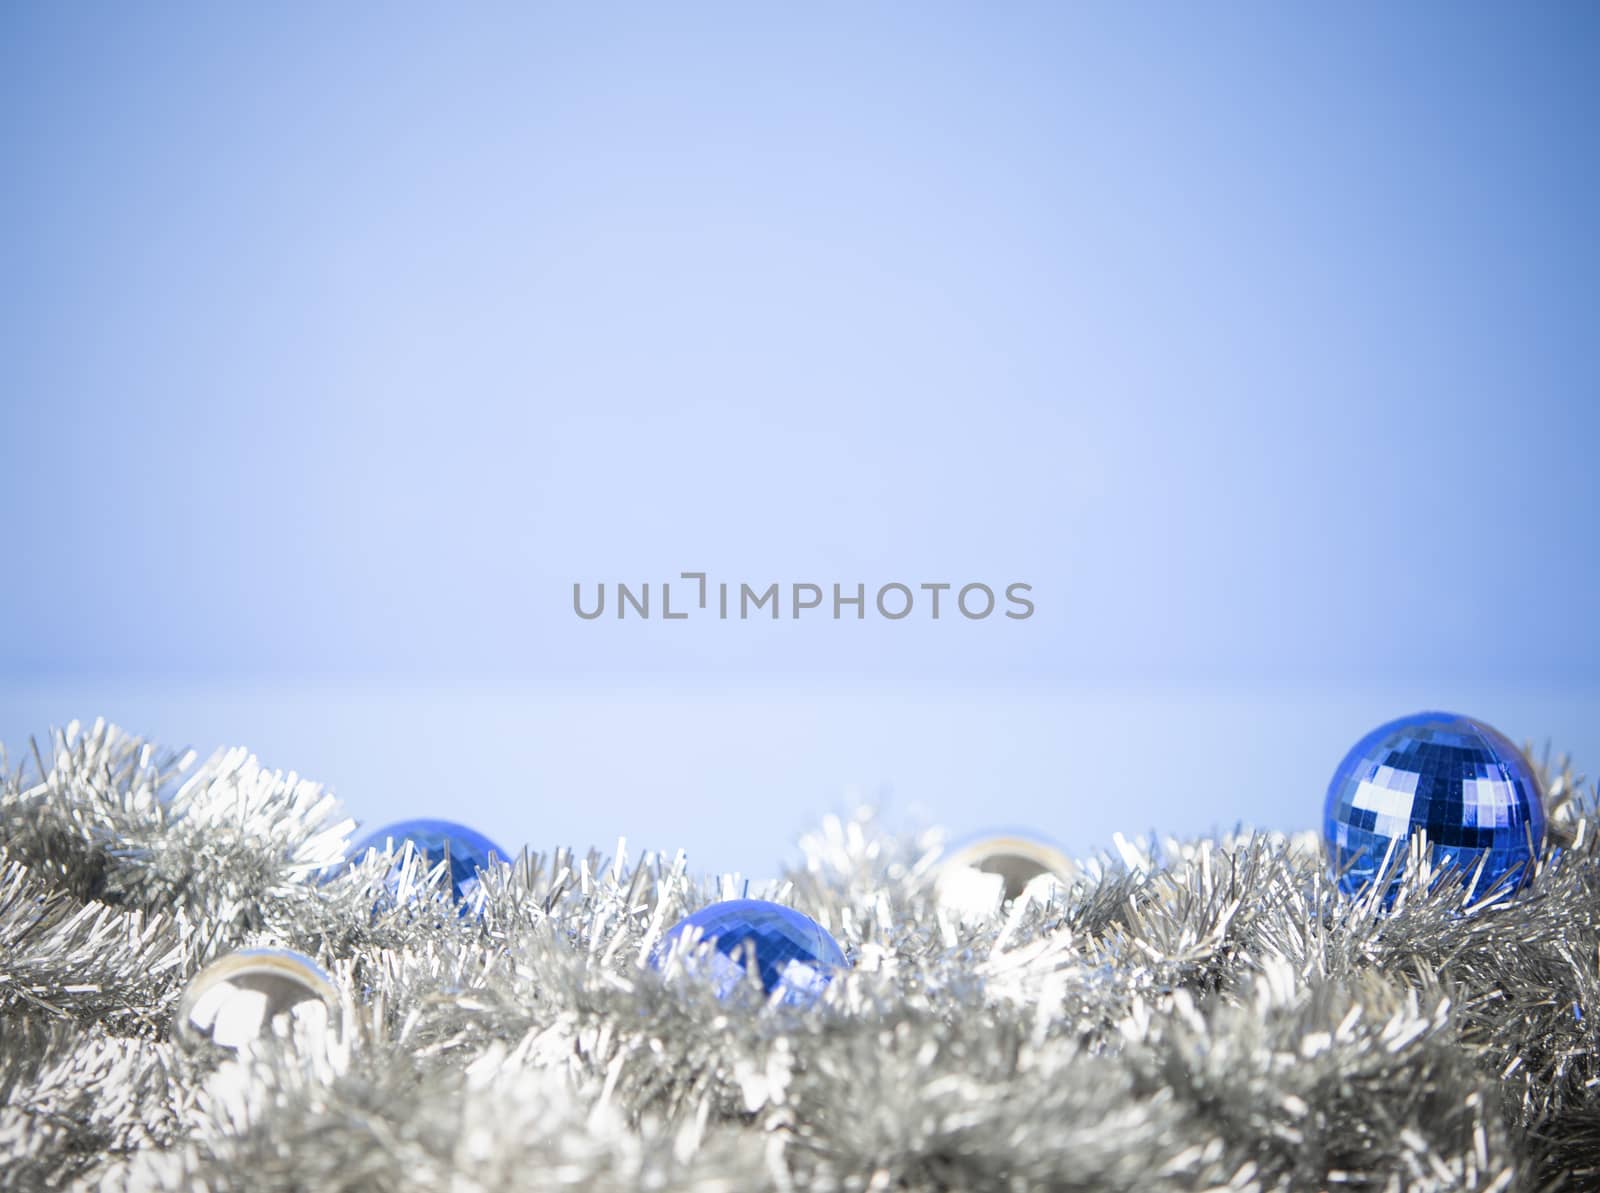 Christmas copy space with blue and silver bright baubles in silver decorative chain garland on light blue background with bokeh effect